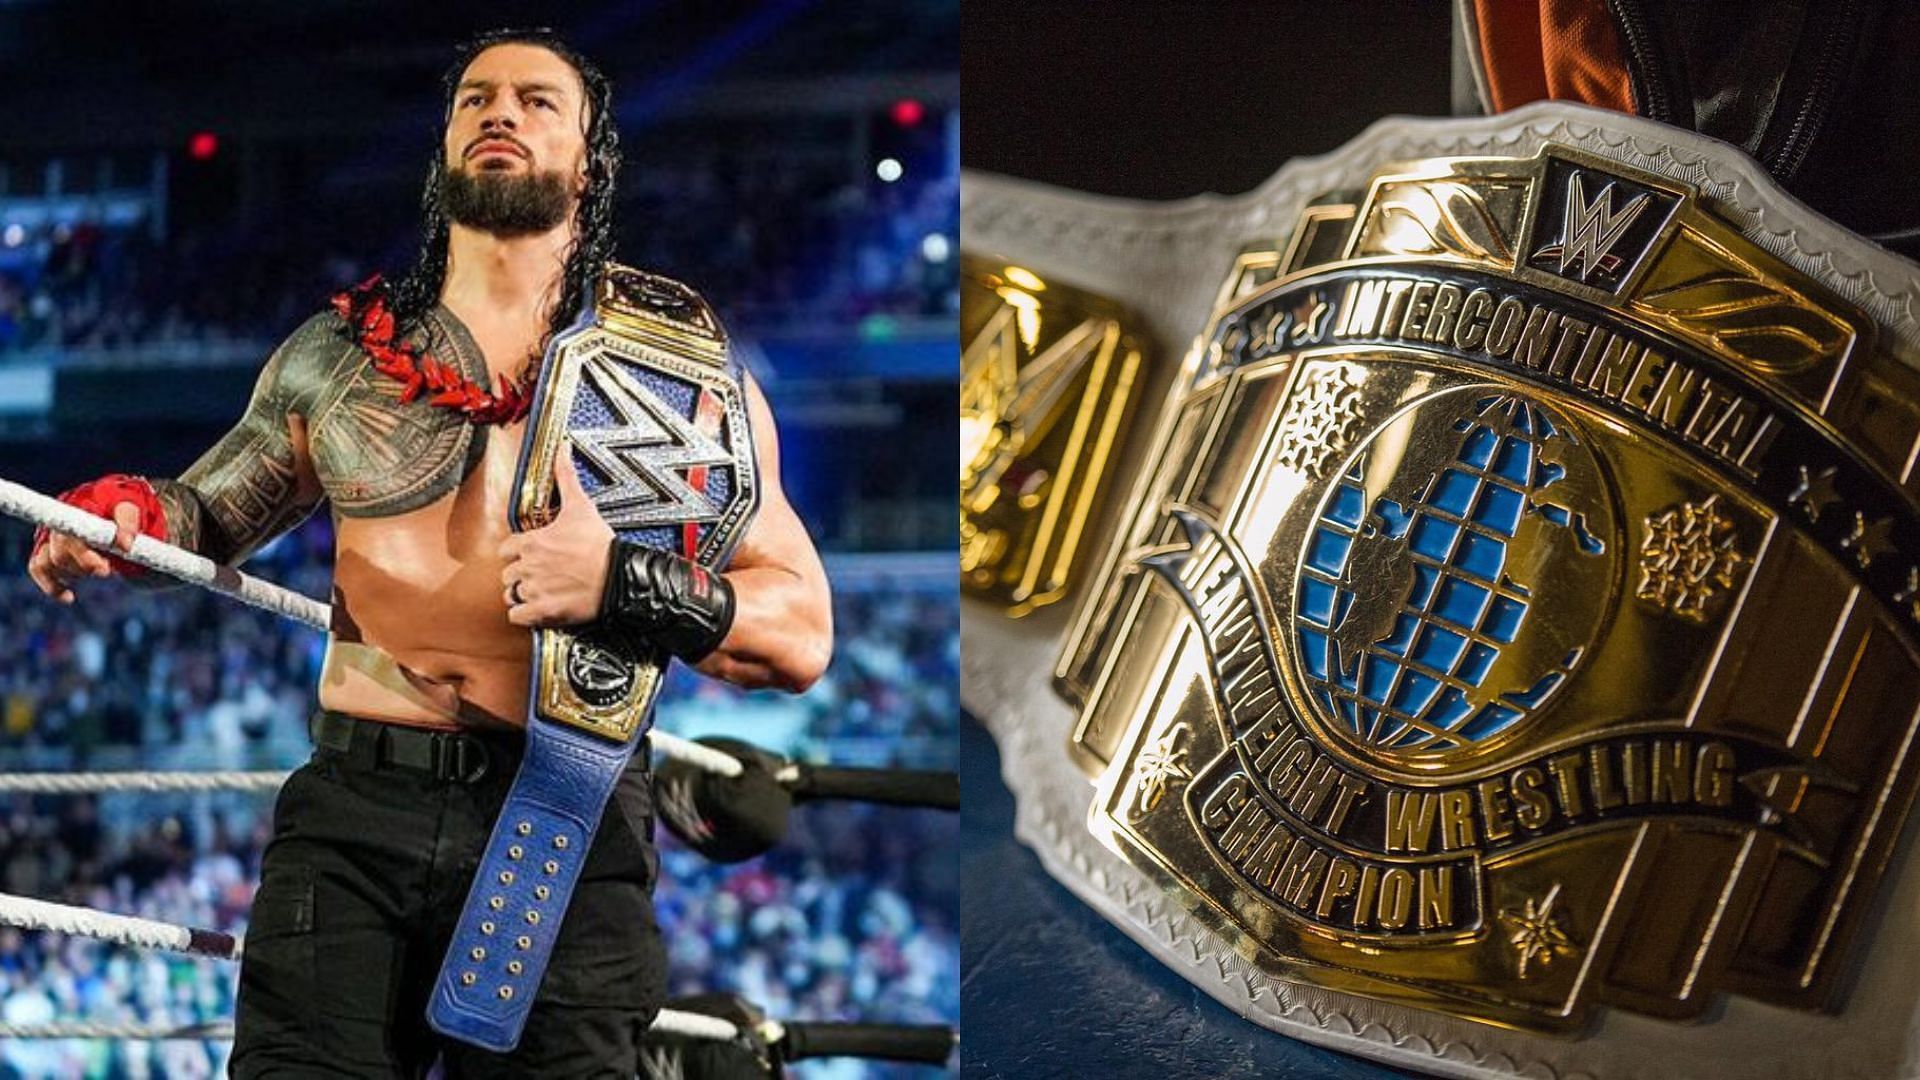 Who will be the one to dethrone Roman Reigns?